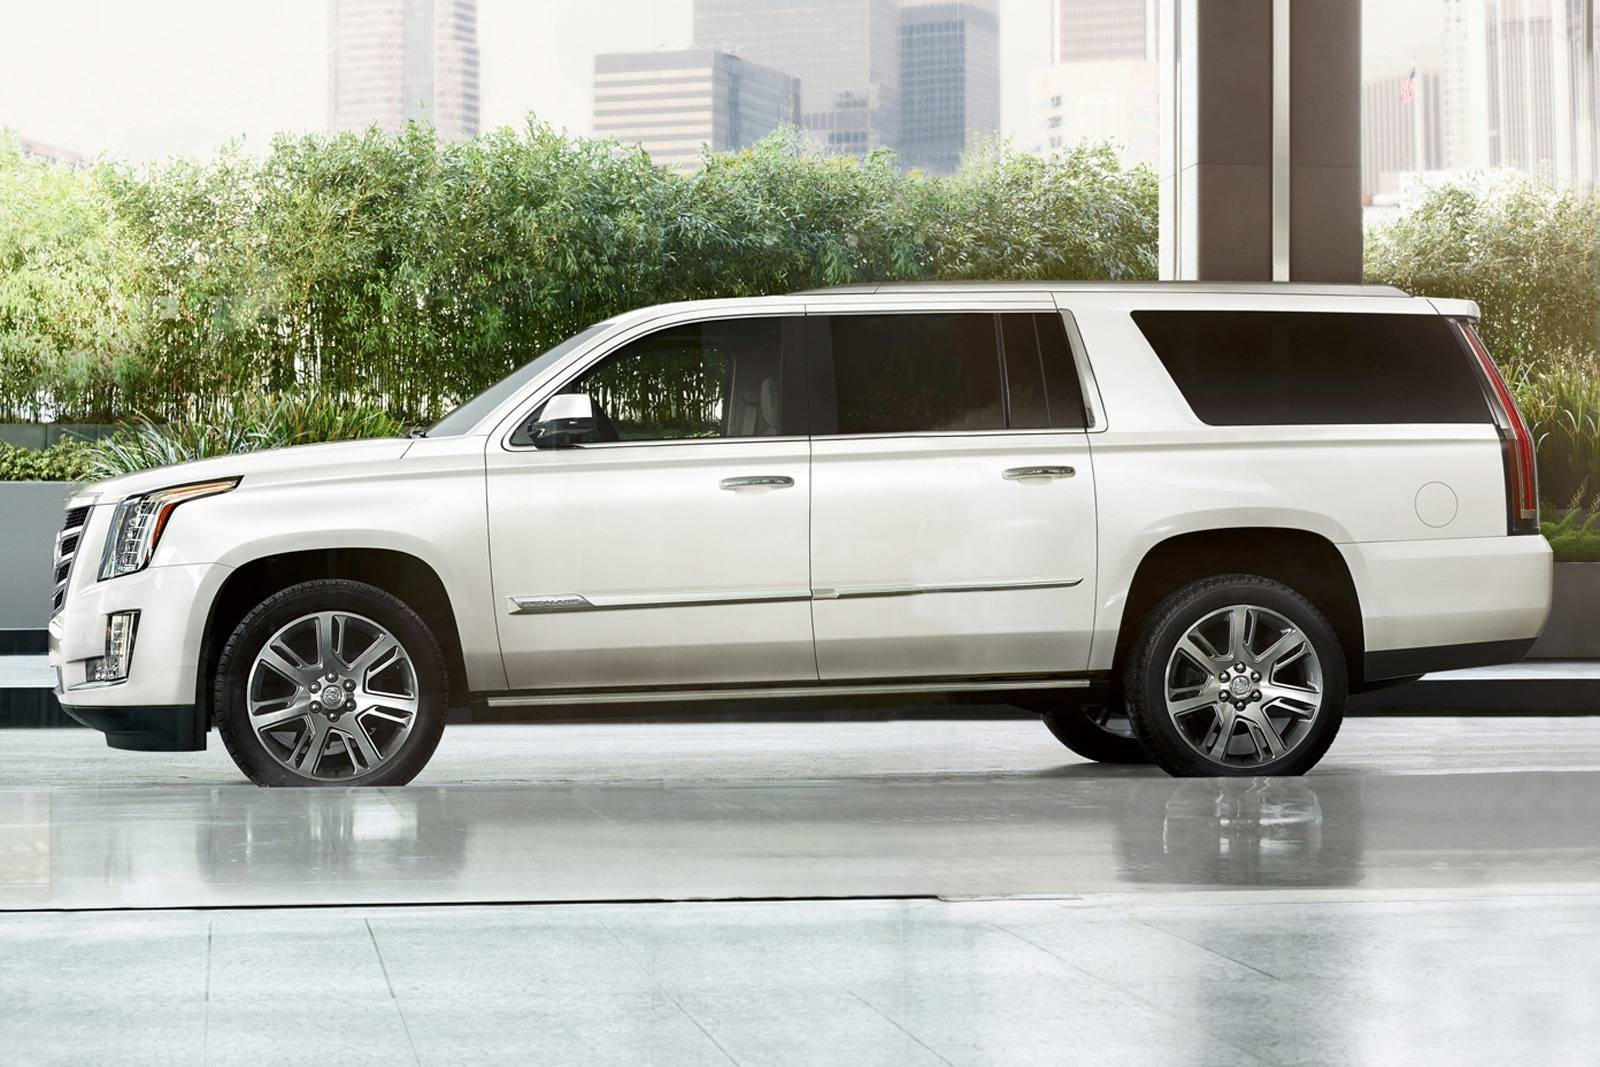 New Cadillac Escalade Prices Have Never Been This Low | CarBuzz